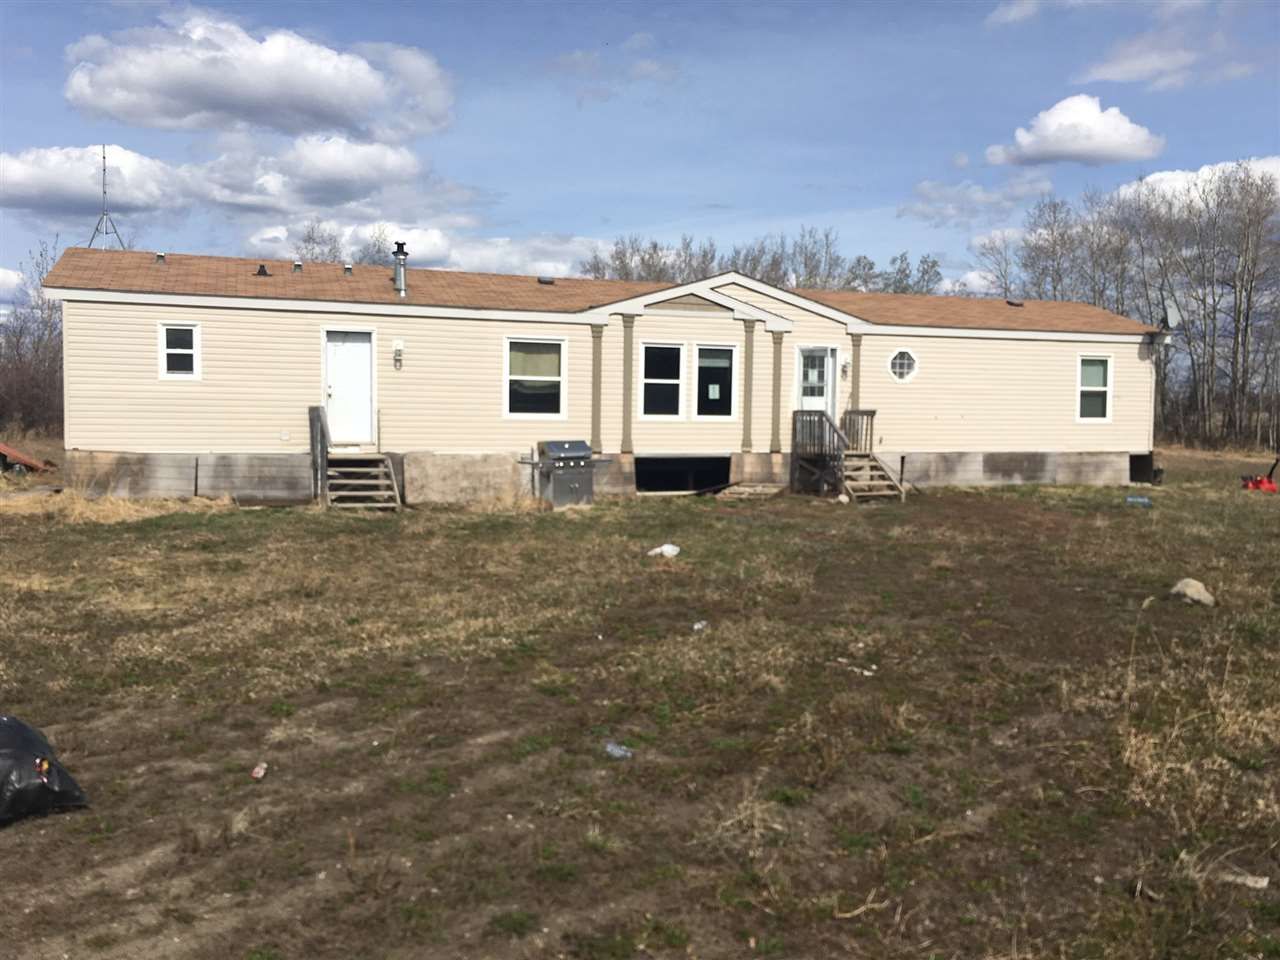 Main Photo: 6476 CLAYHURST (111) Road in Fort St. John: Fort St. John - Rural E 100th Manufactured Home for sale (Fort St. John (Zone 60))  : MLS®# R2338084